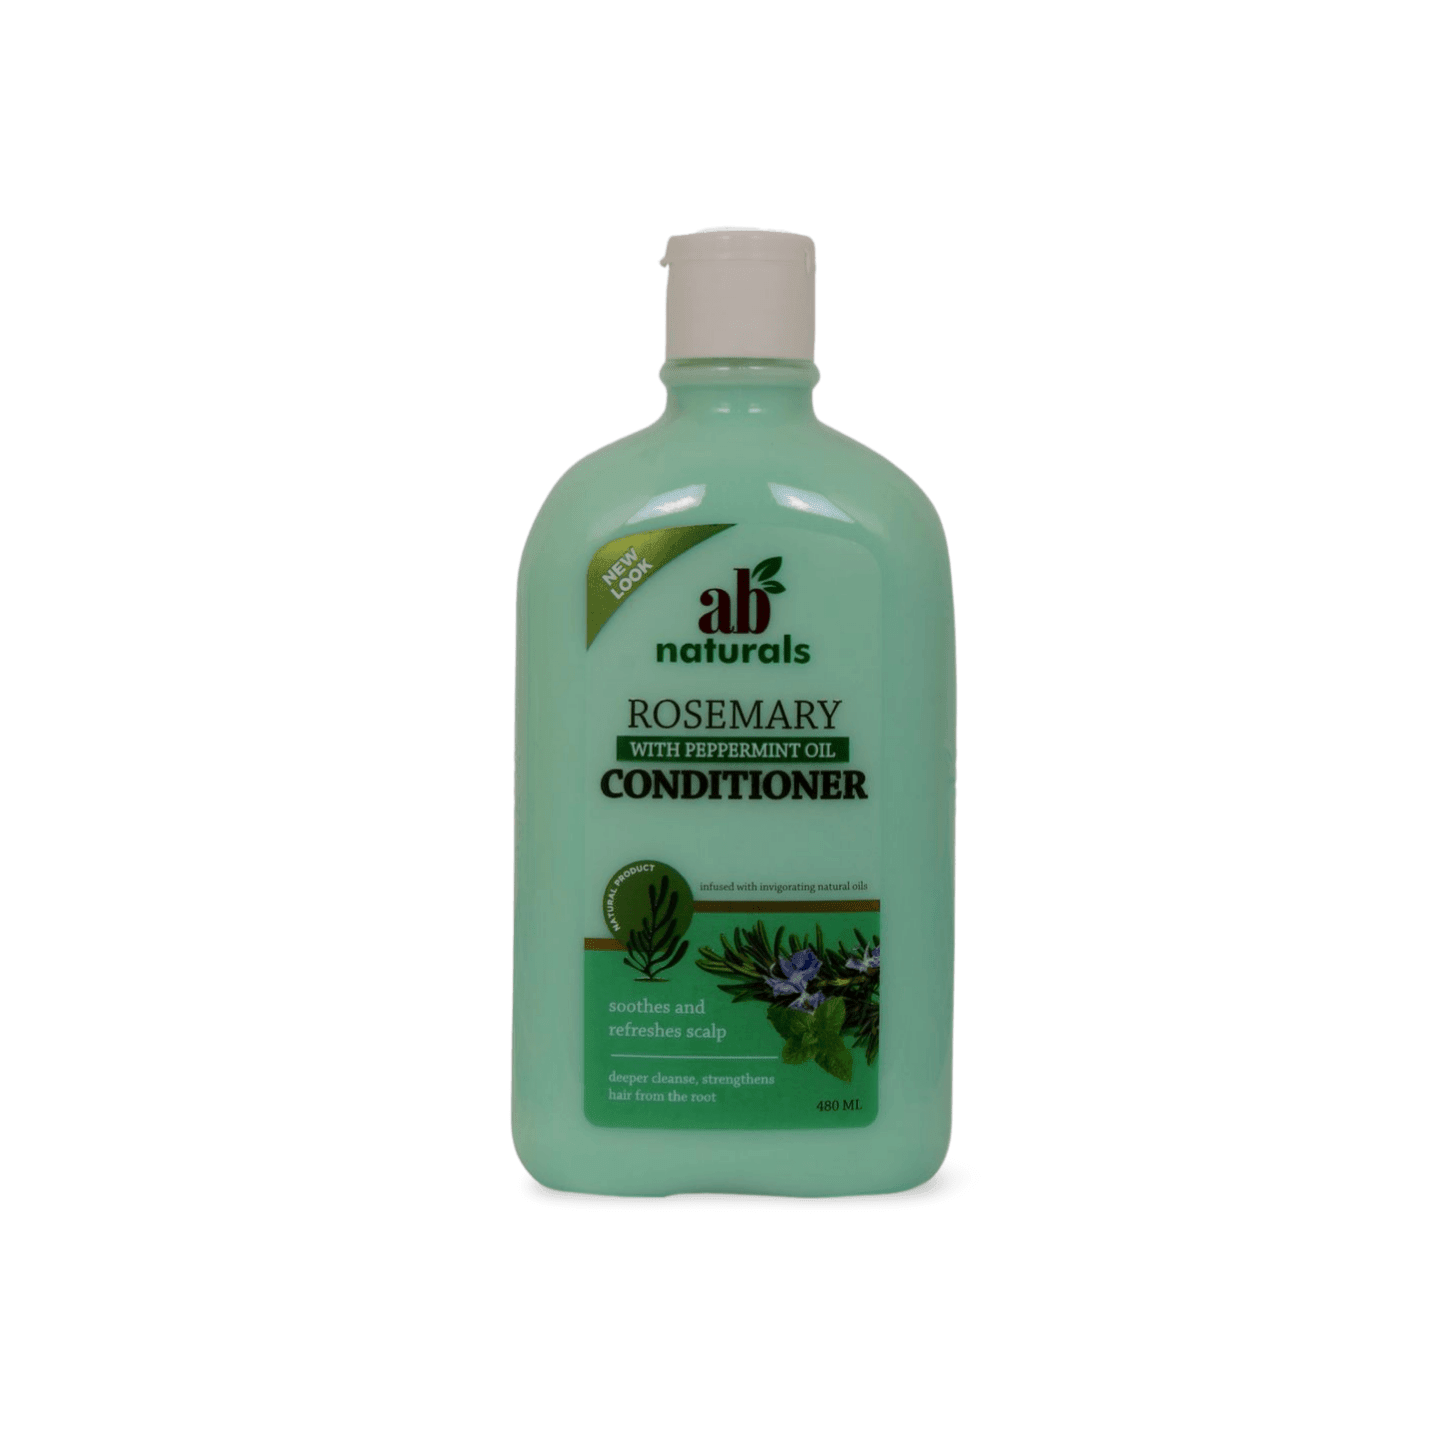 Ab Naturals Rosemary Conditioner 480ml - African Beauty Online